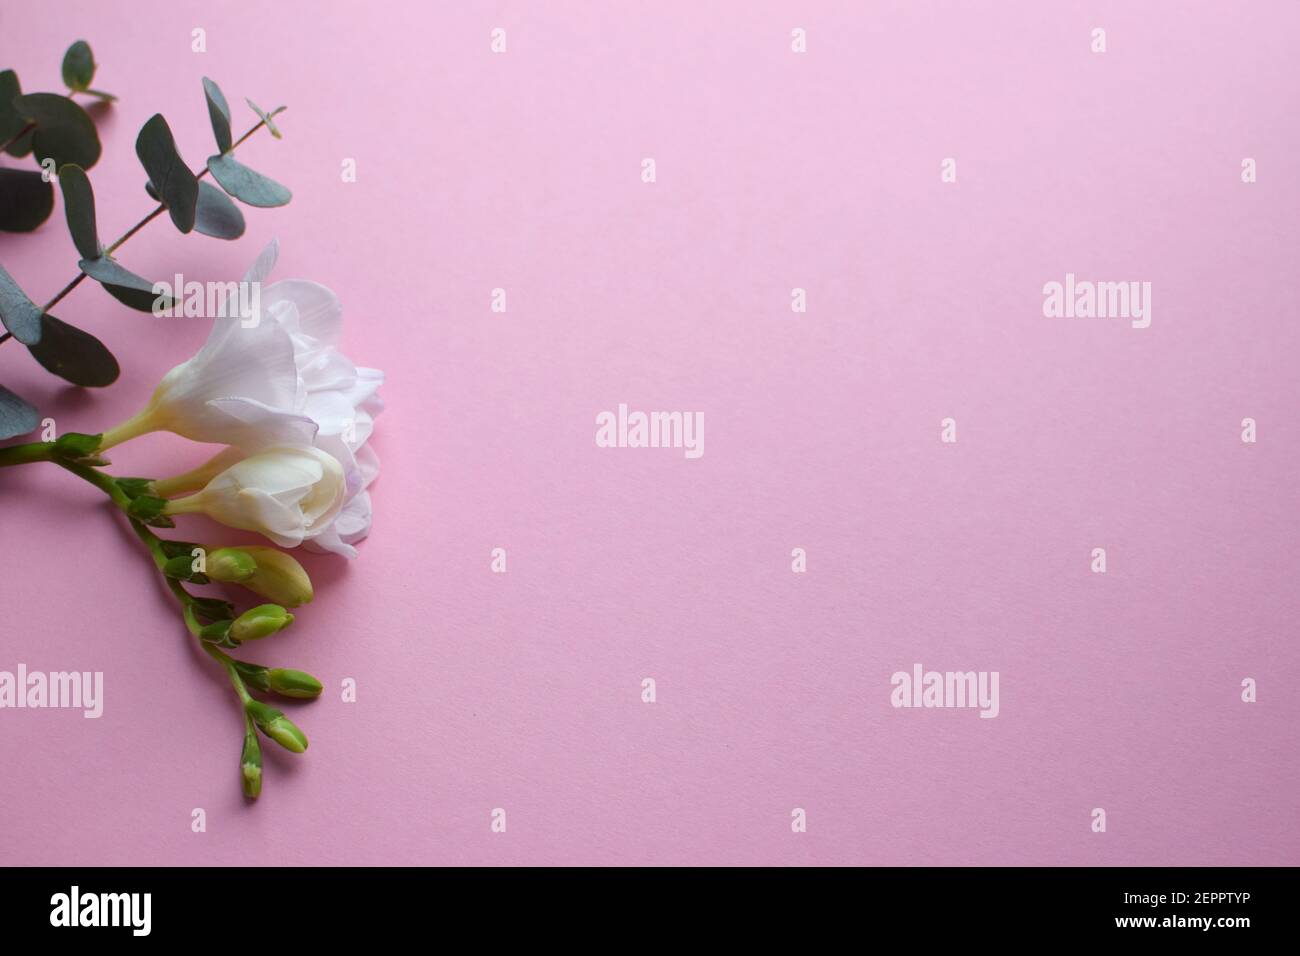 Floral background. Beautiful freesia flower and eucalyptus branches on a pink background. Minimalism. Flat lay, top view. Place for text. Stock Photo